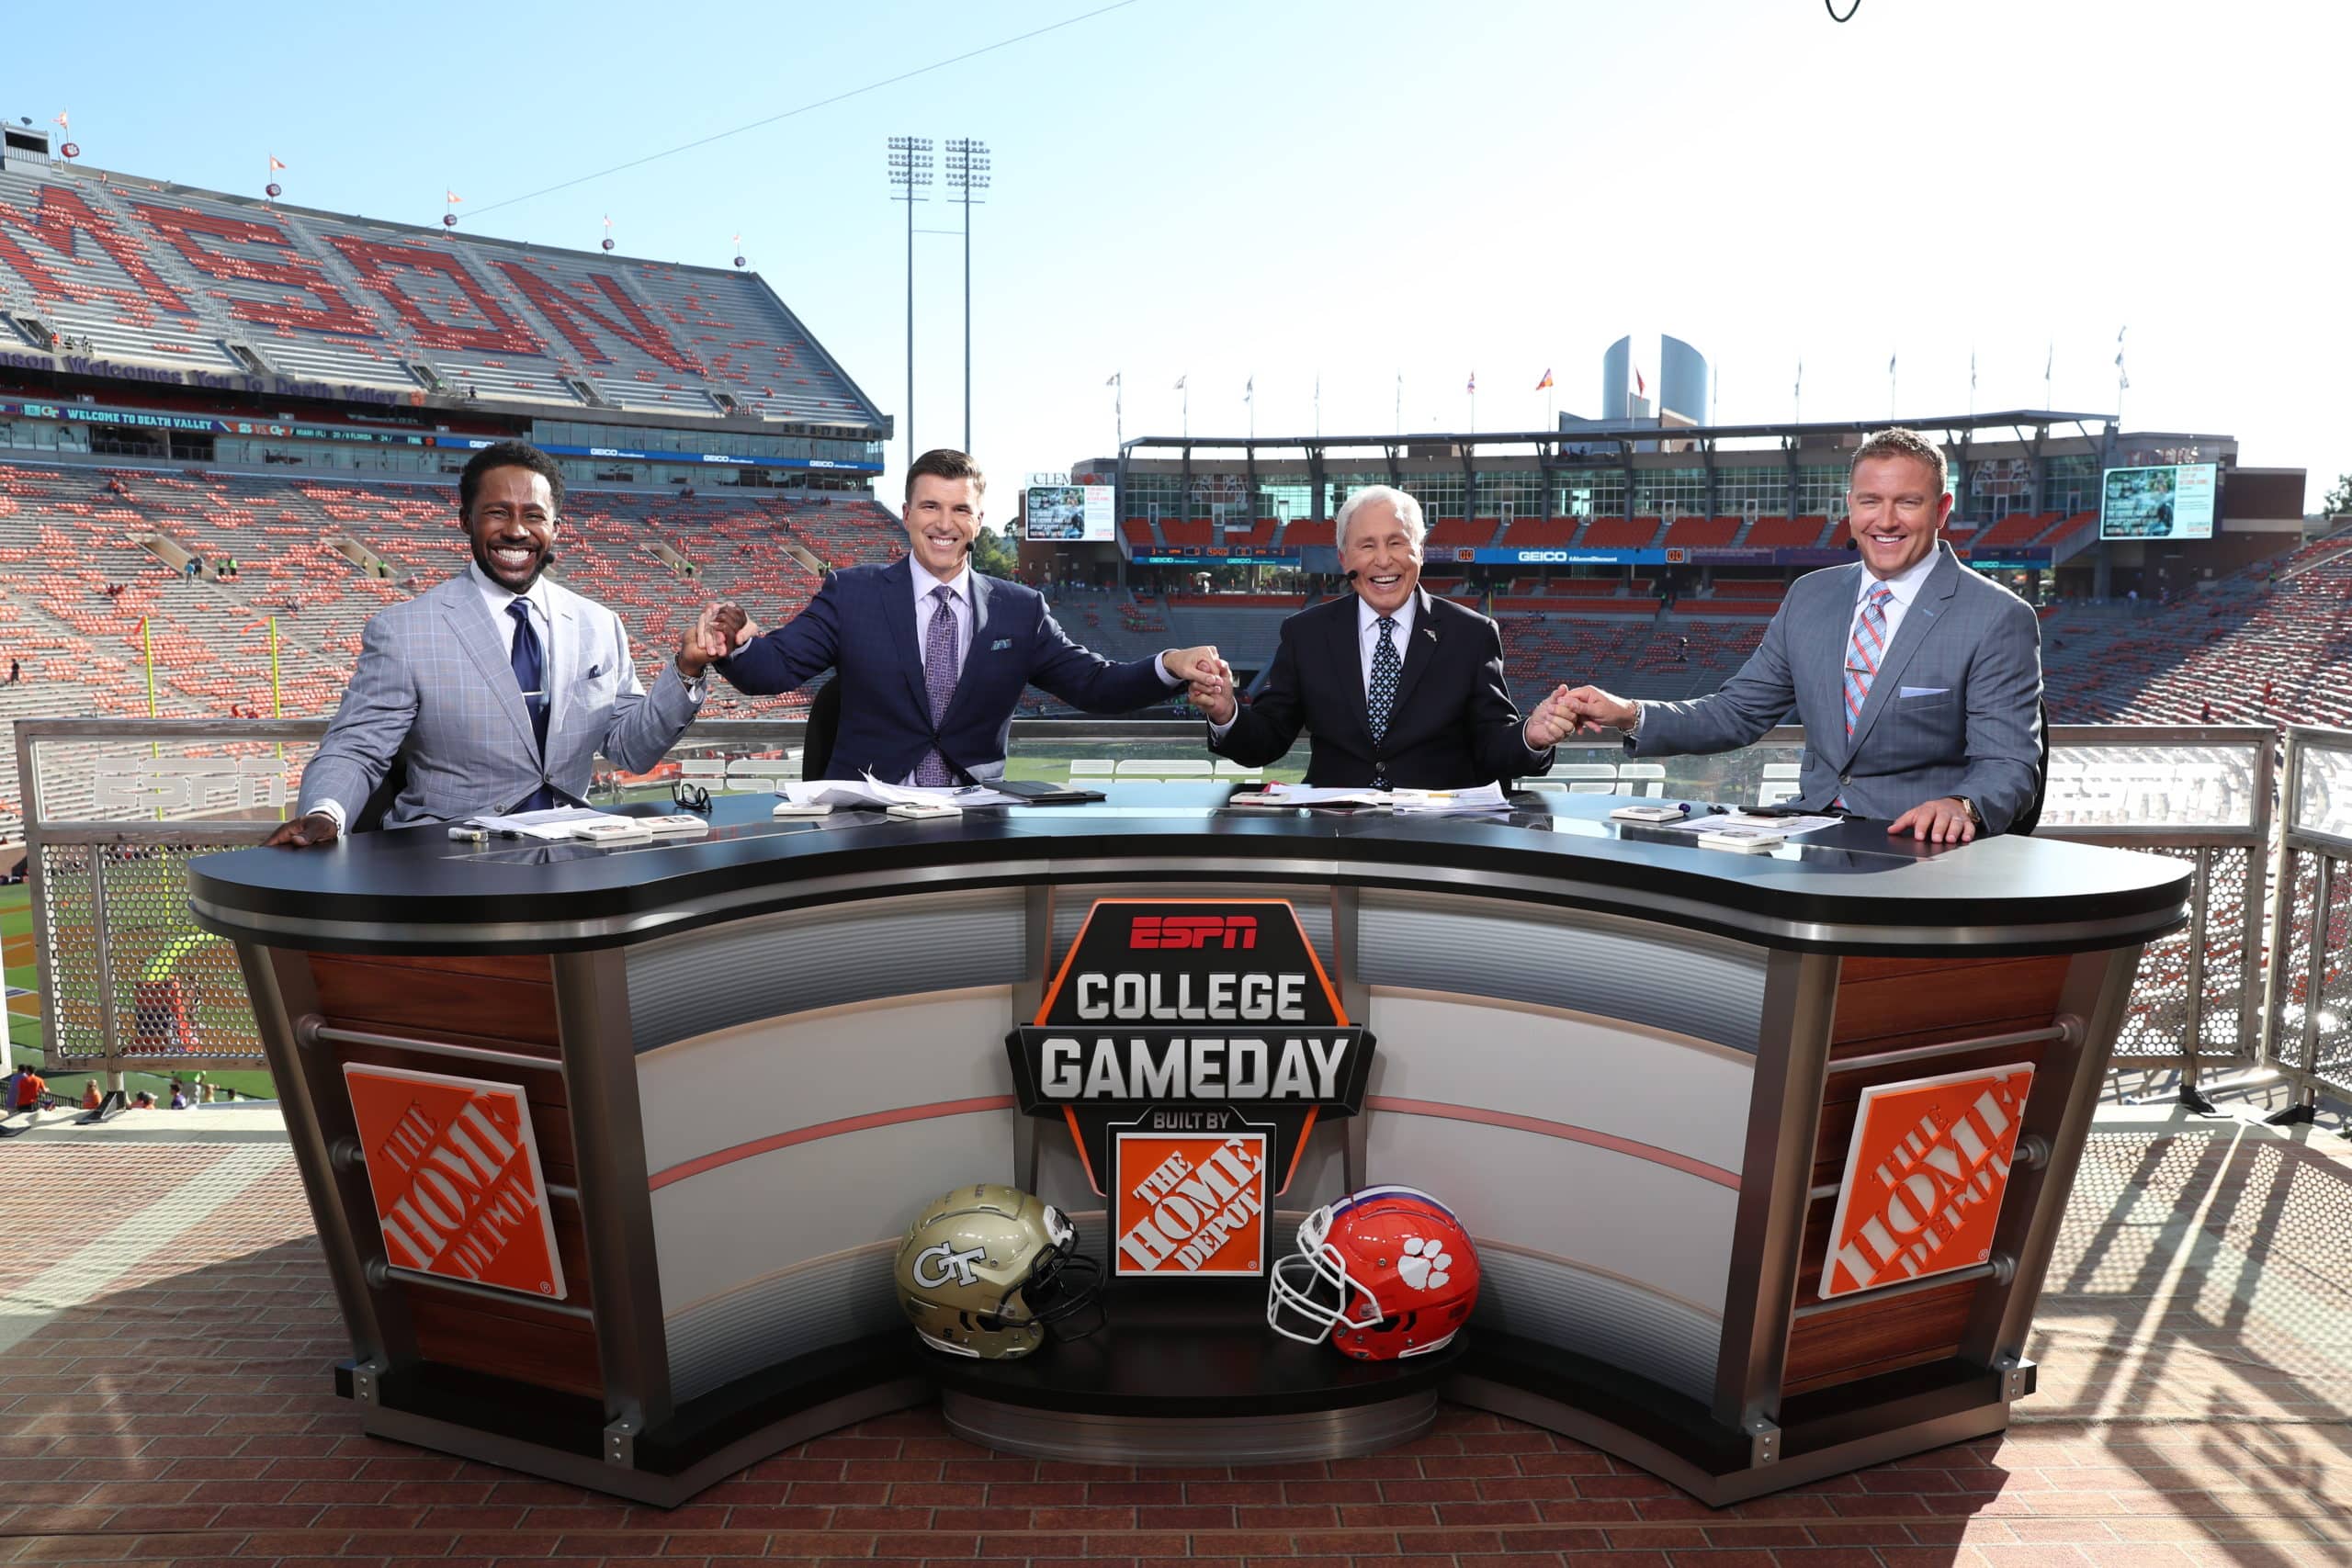 College gameday august 29, 2019